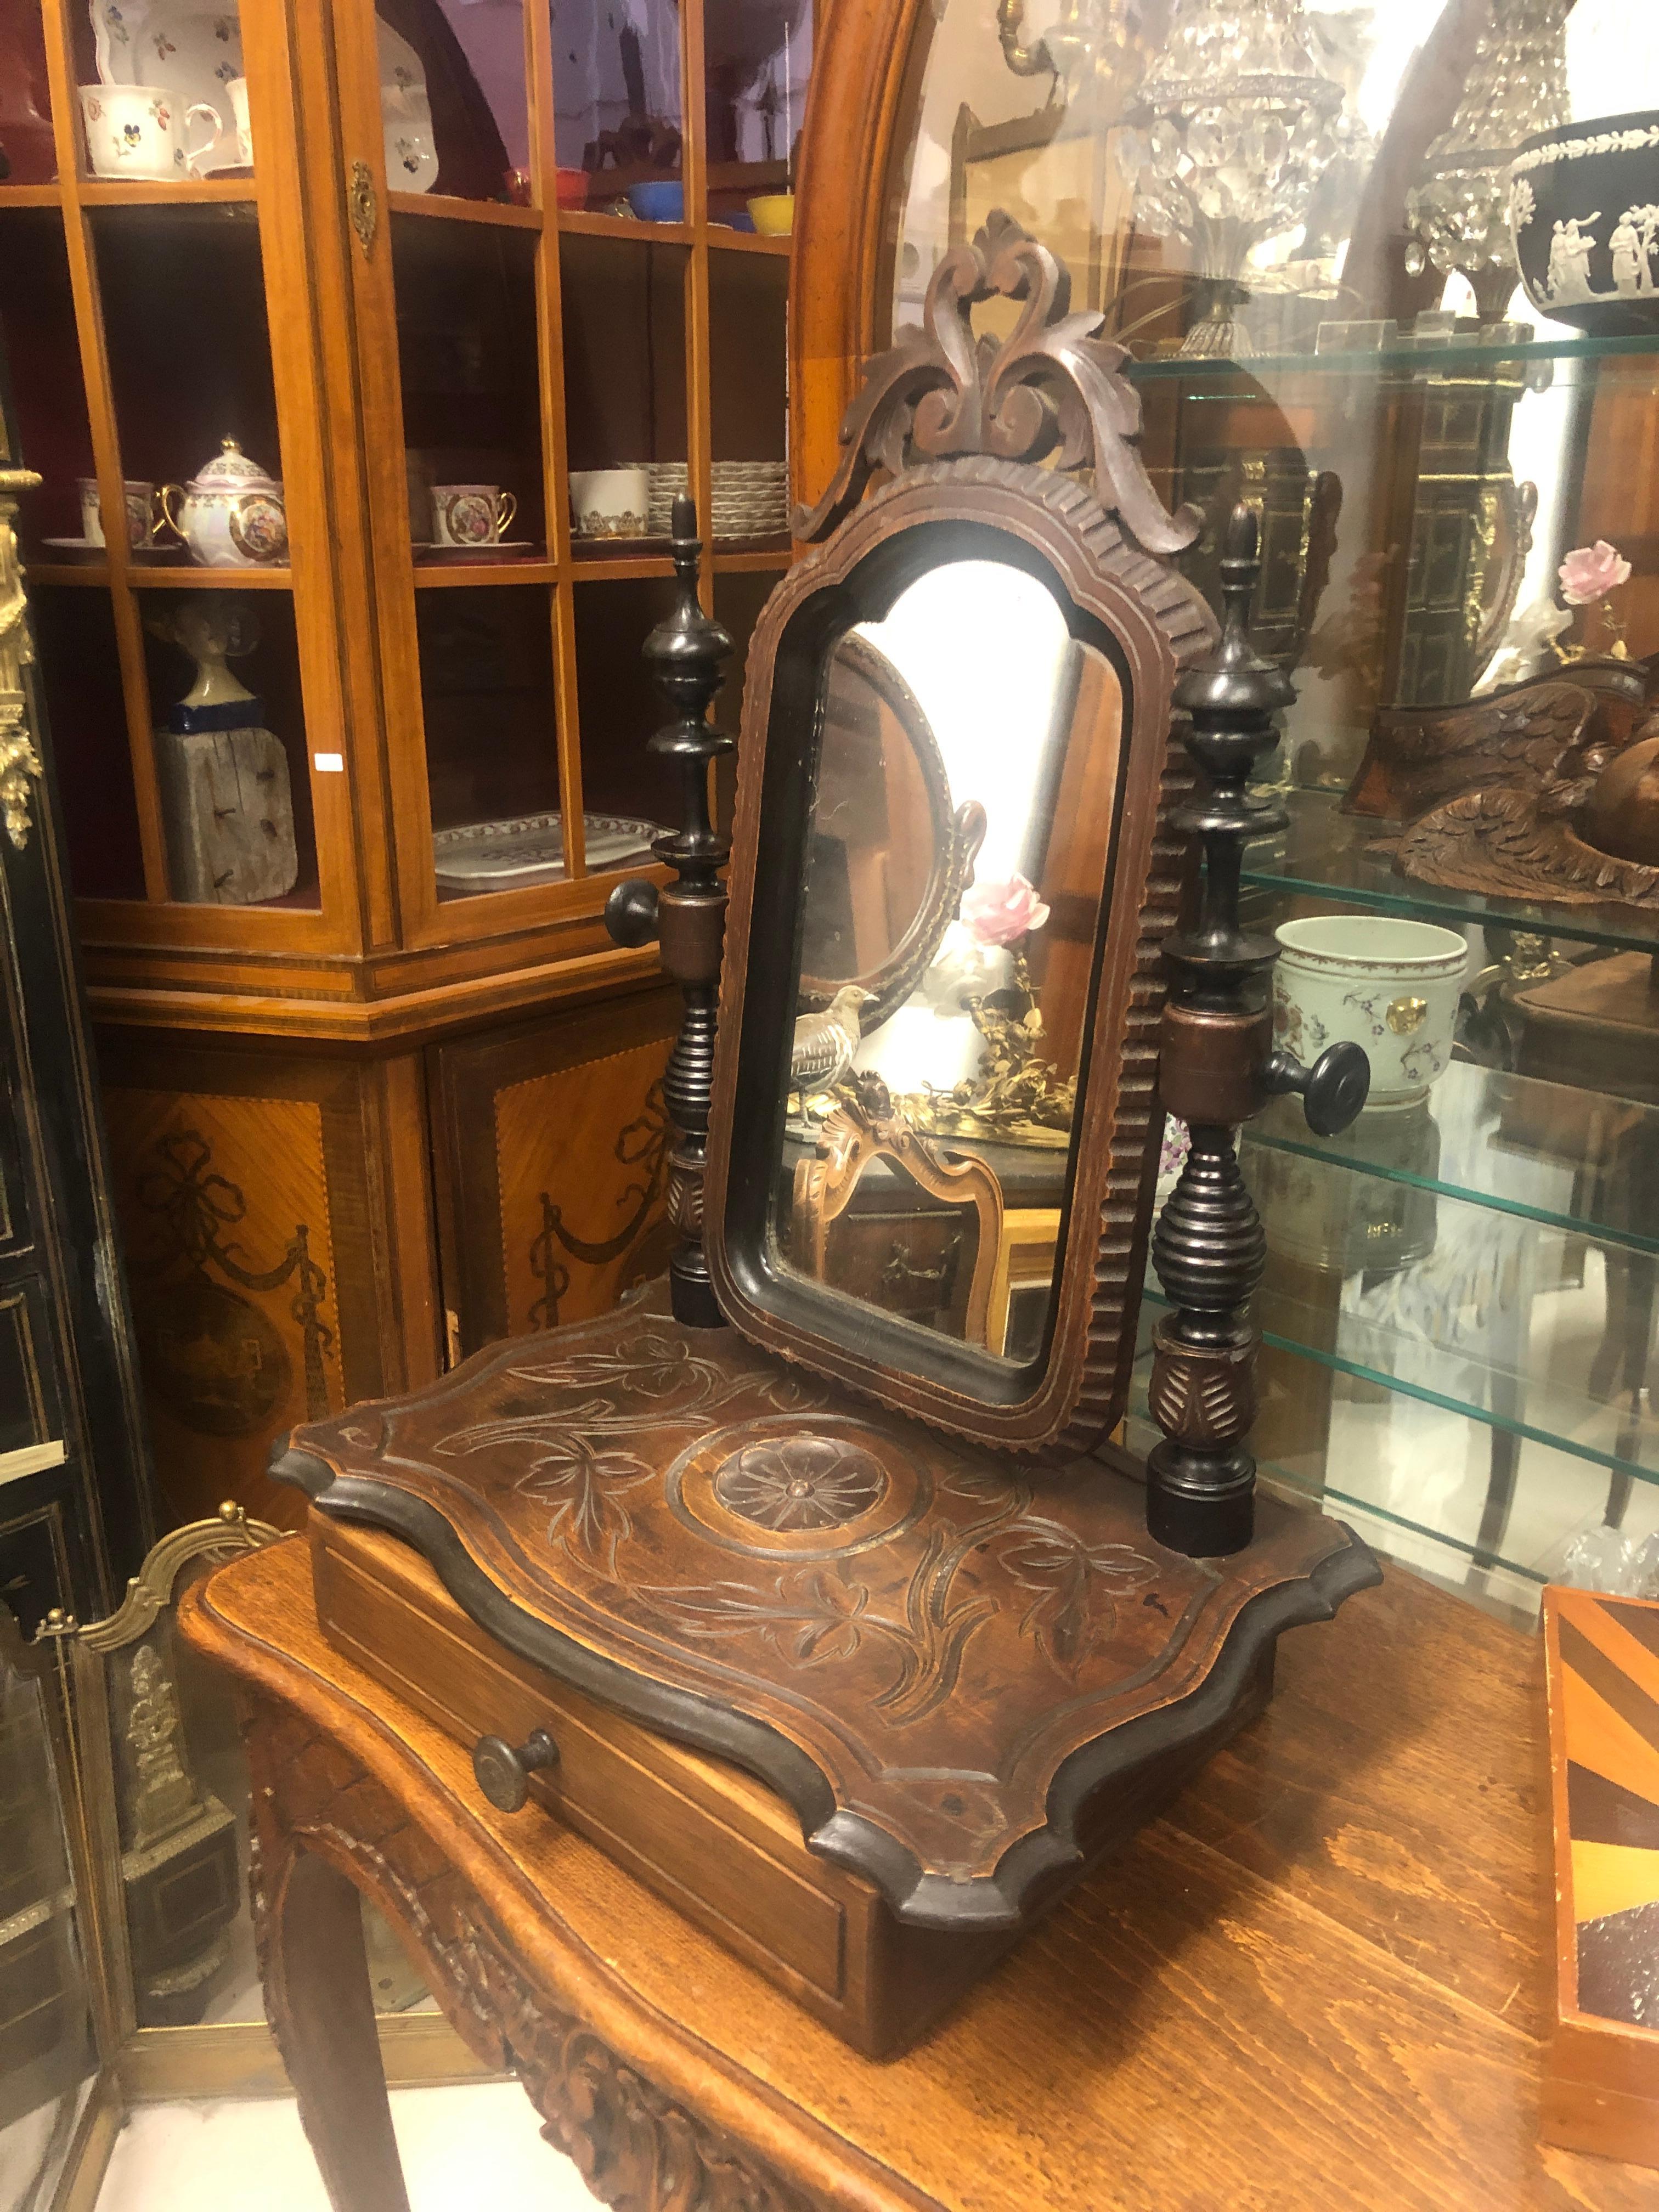 Elegant French walnut dressing table mirror with front drawer in very good condition with it original glass.
Circa 1870